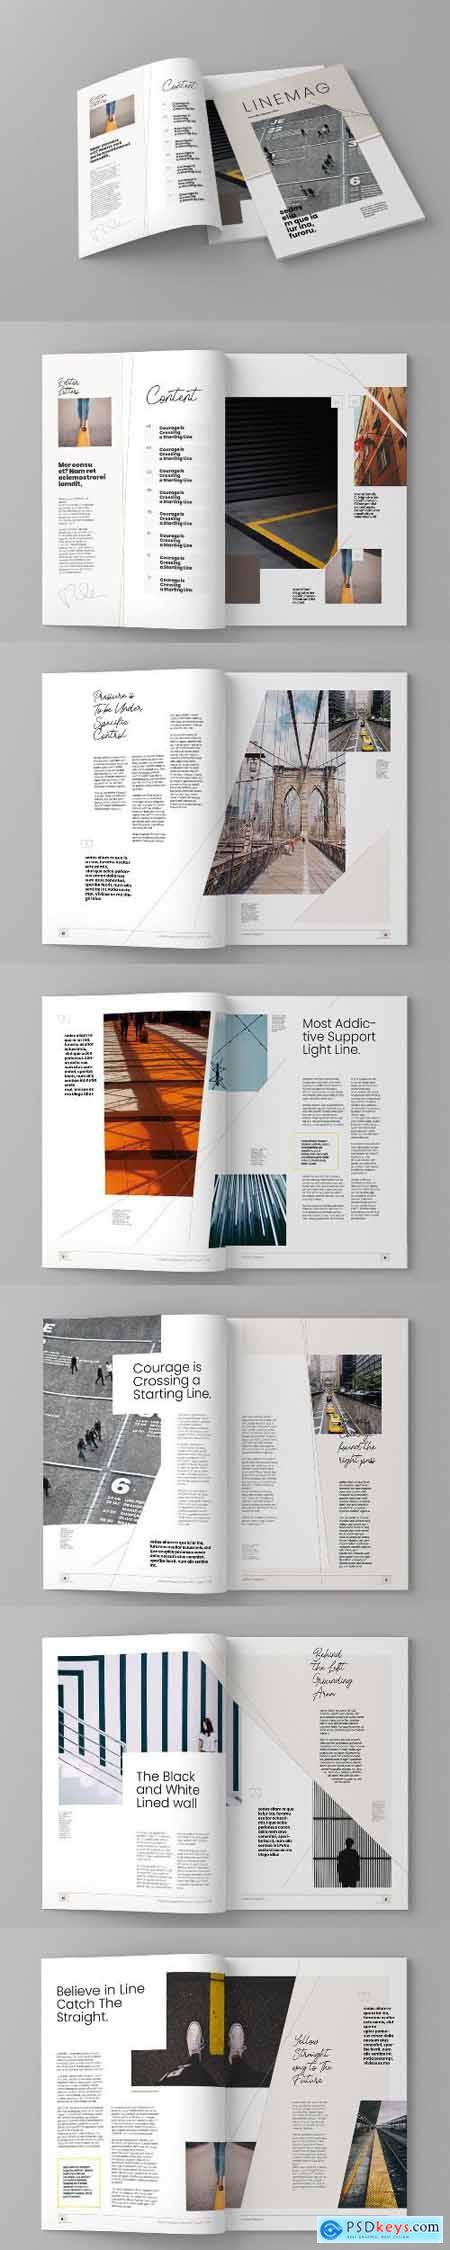 Linemag - Magazine Template